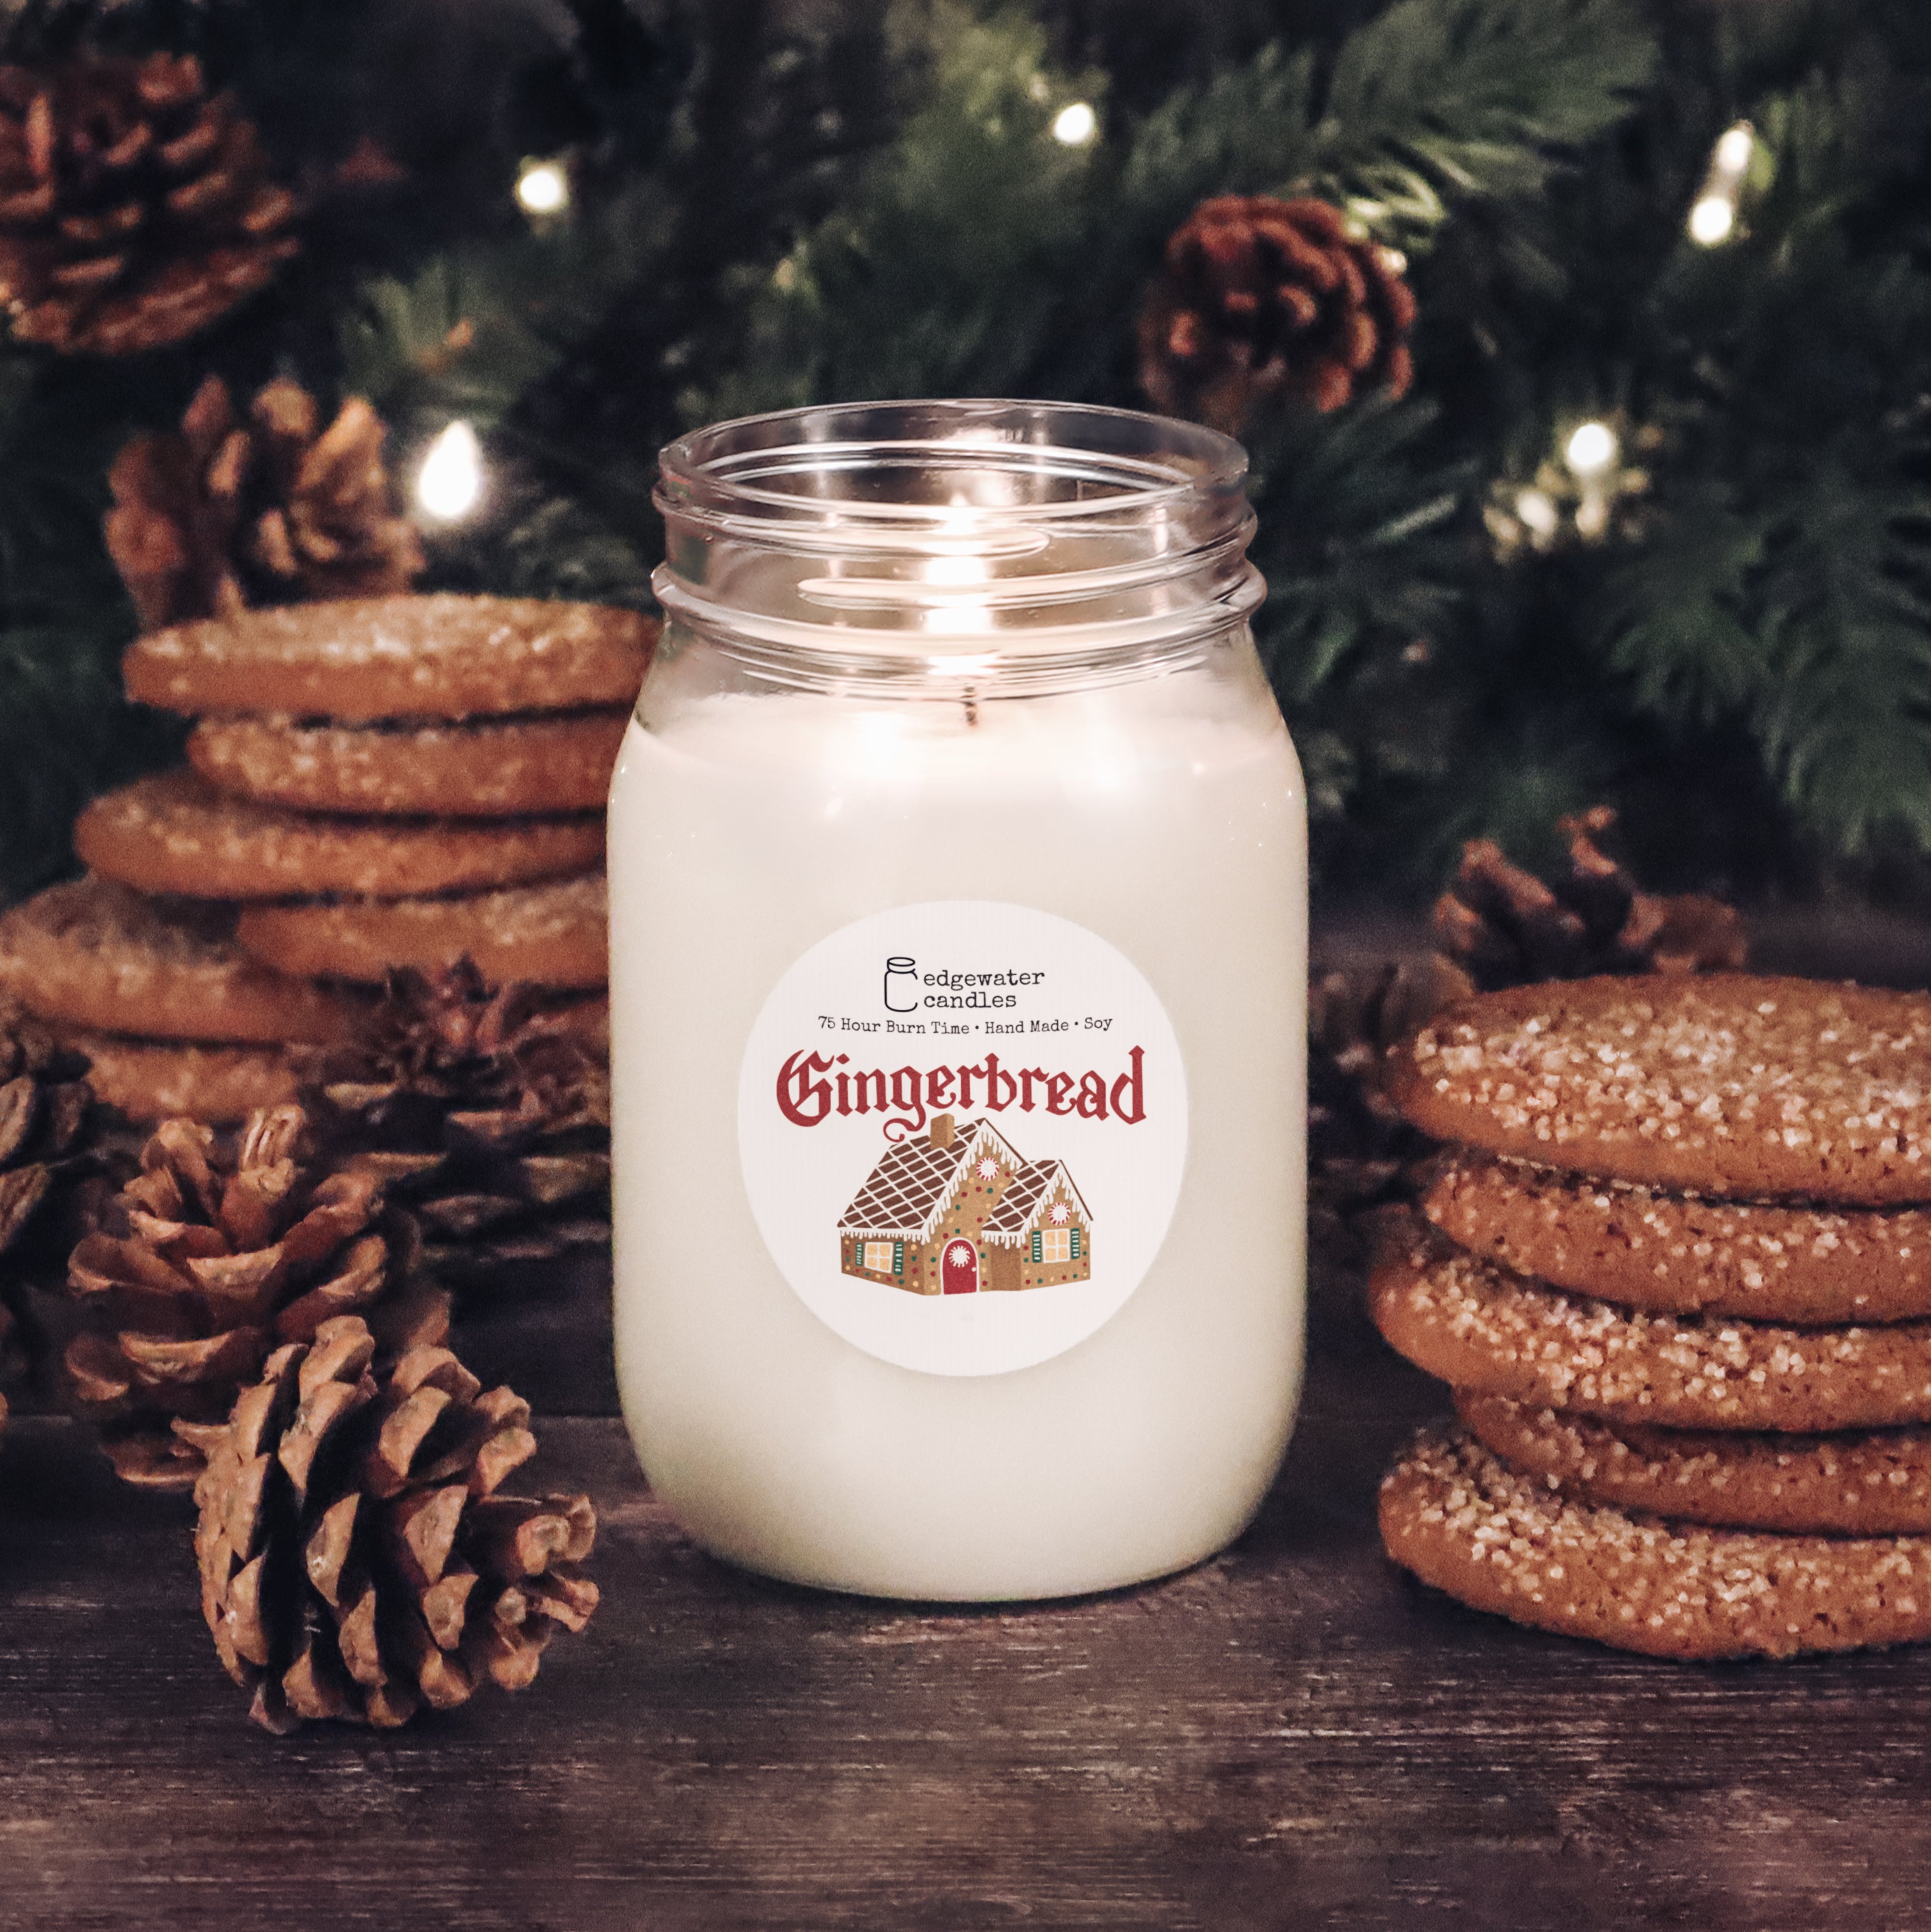 Introducing Gingerbread! Our newest limited edition seasonal scent.